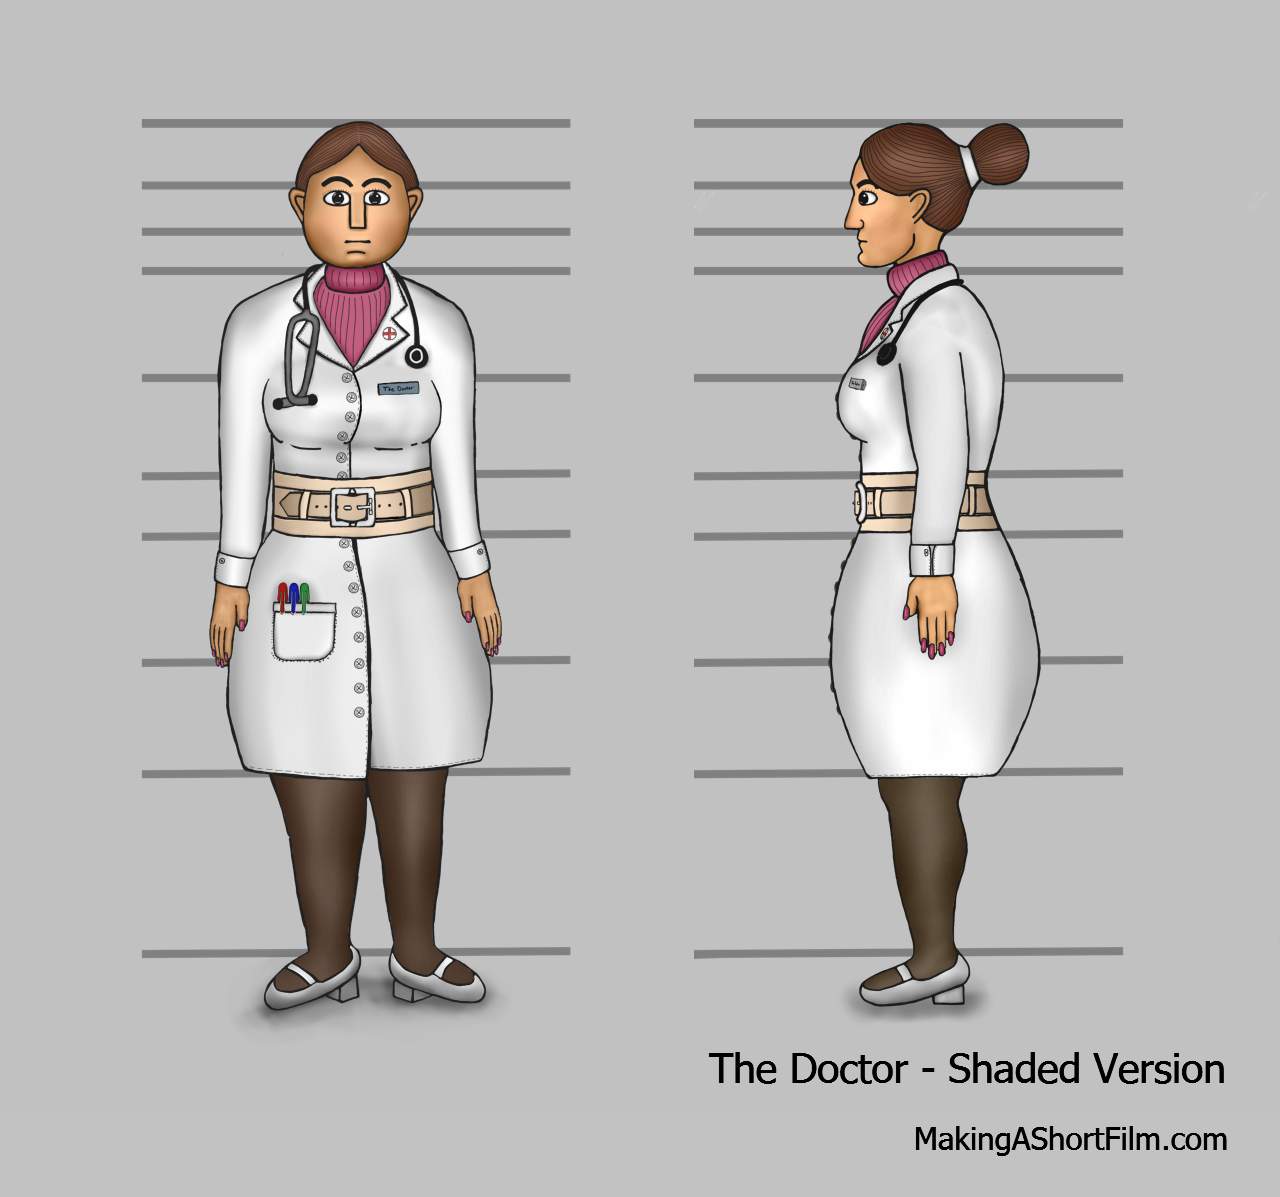 The completed Doctor concept art